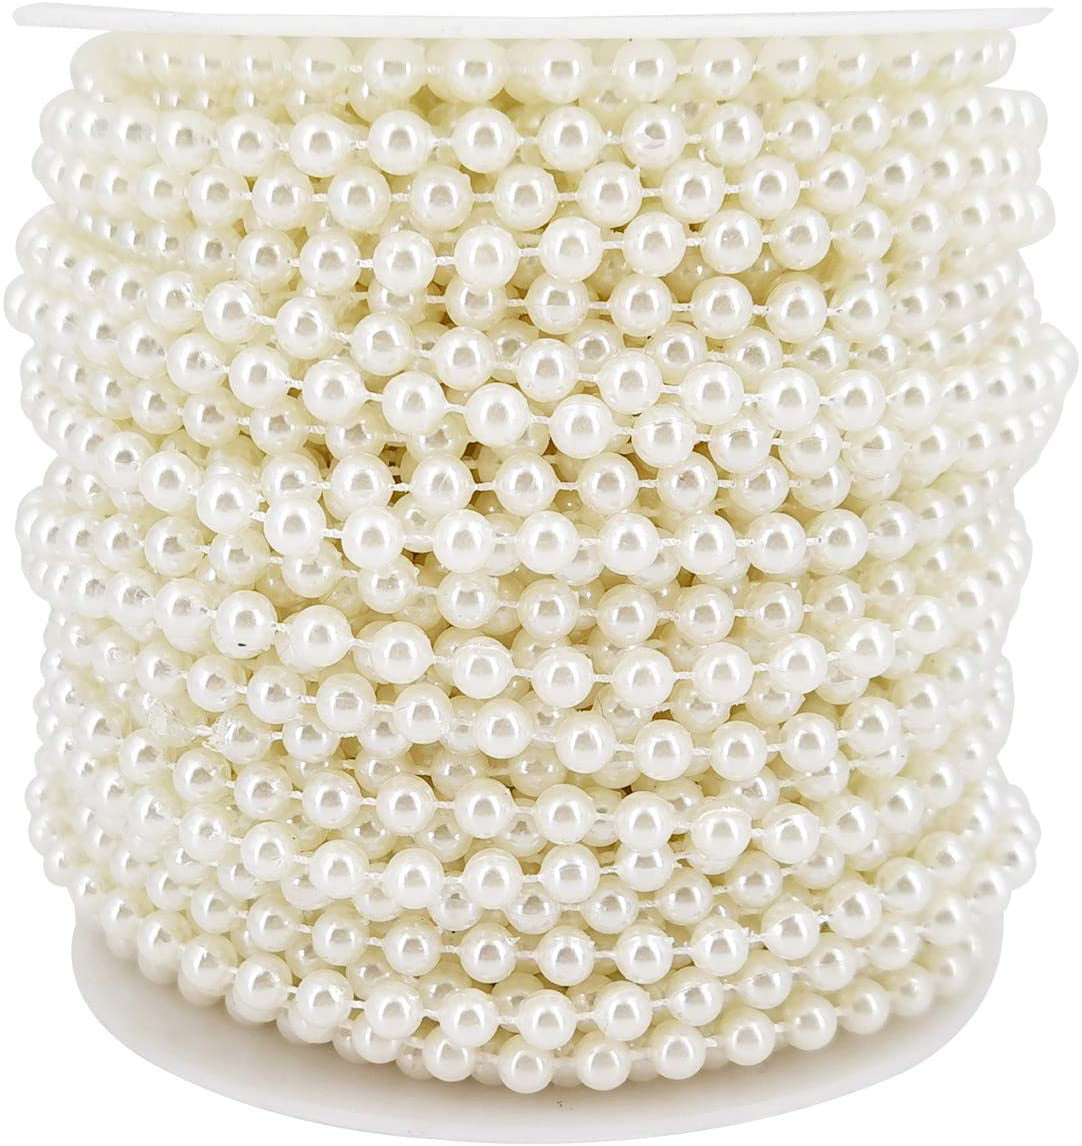 Colorful 4MM Pearl Bead Garland Spool Rope For Wedding Centerpiece Decor 